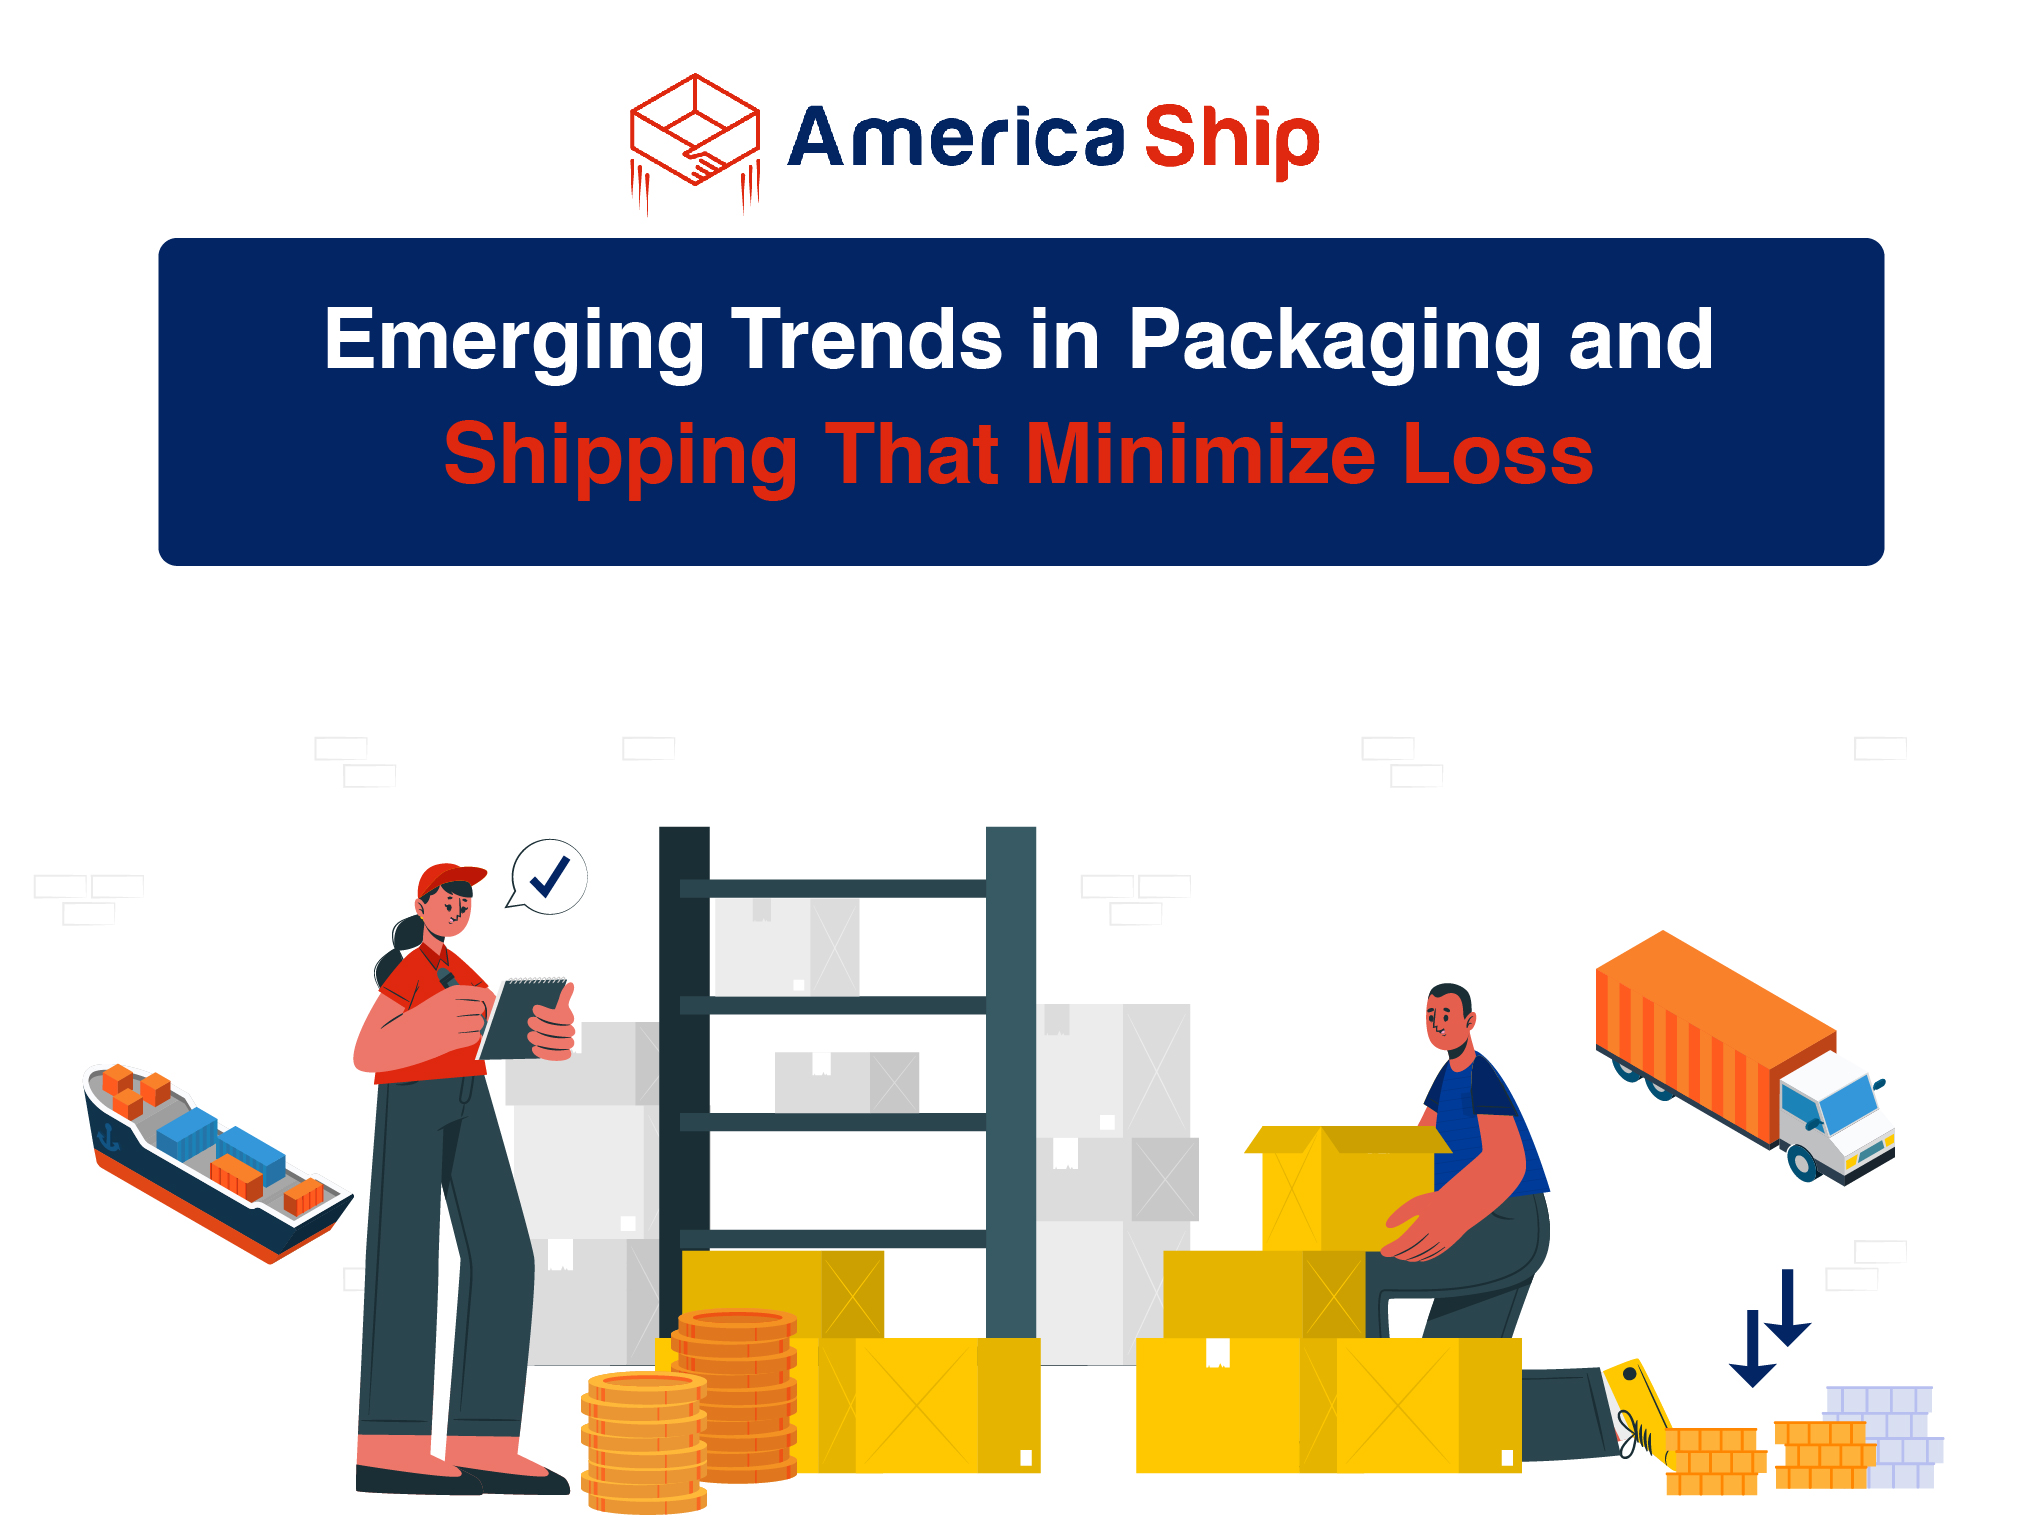 Emerging Trends in Packaging and Shipping That Minimize Loss